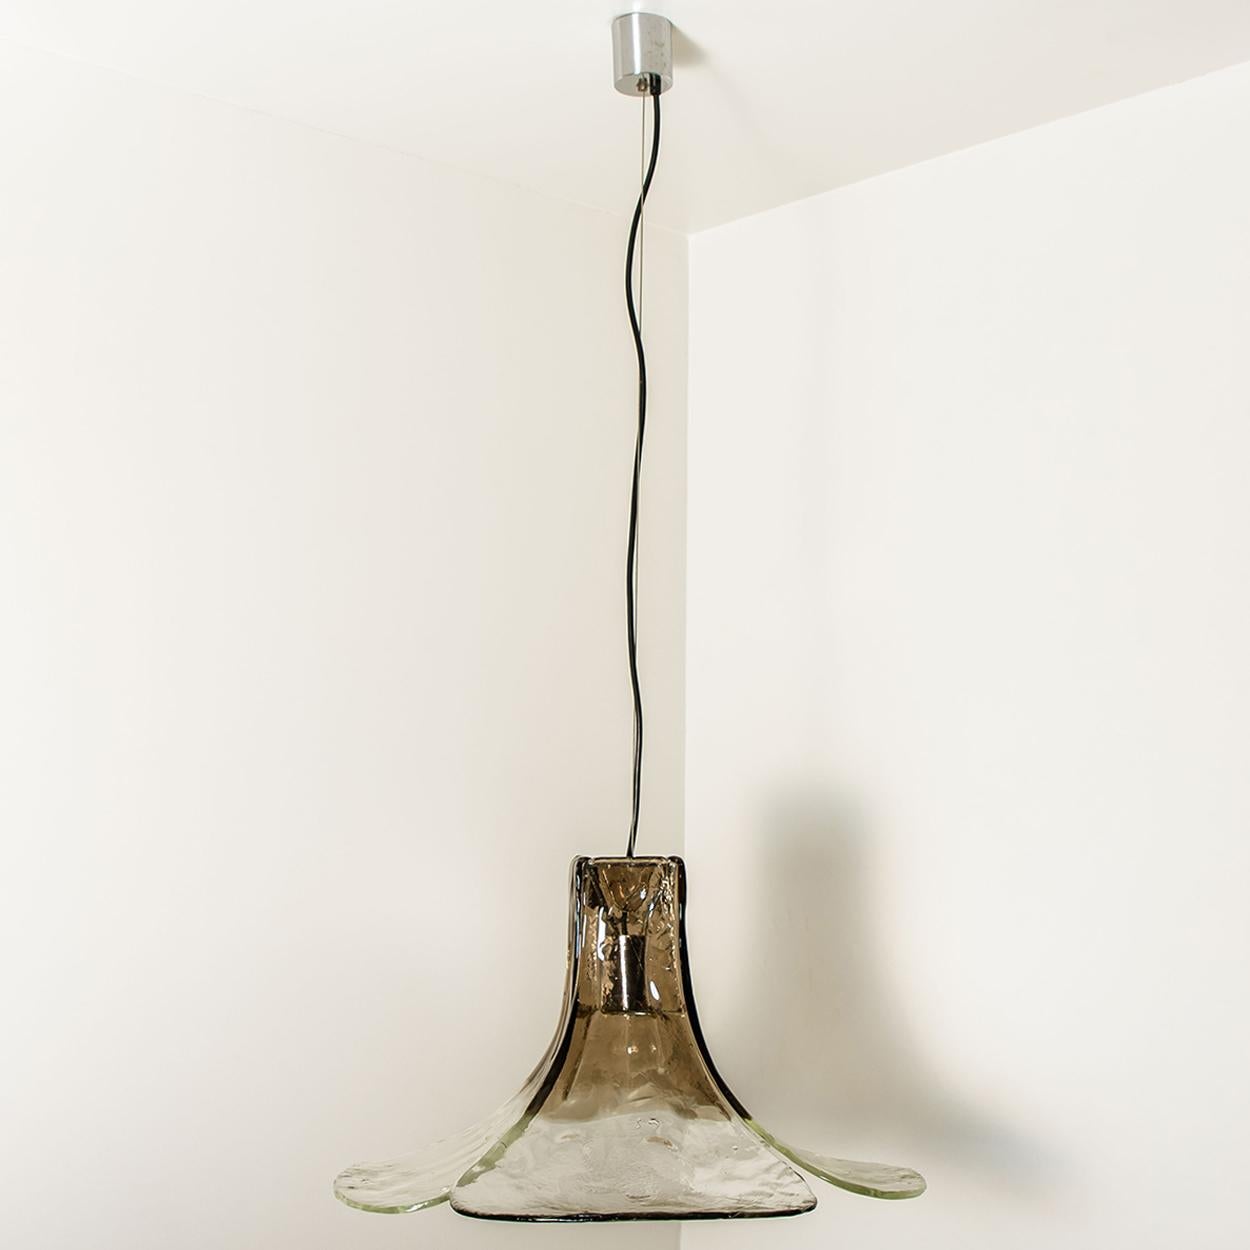 1 of the 2 Pendant Lamps by Carlo Nason for Mazzega 6